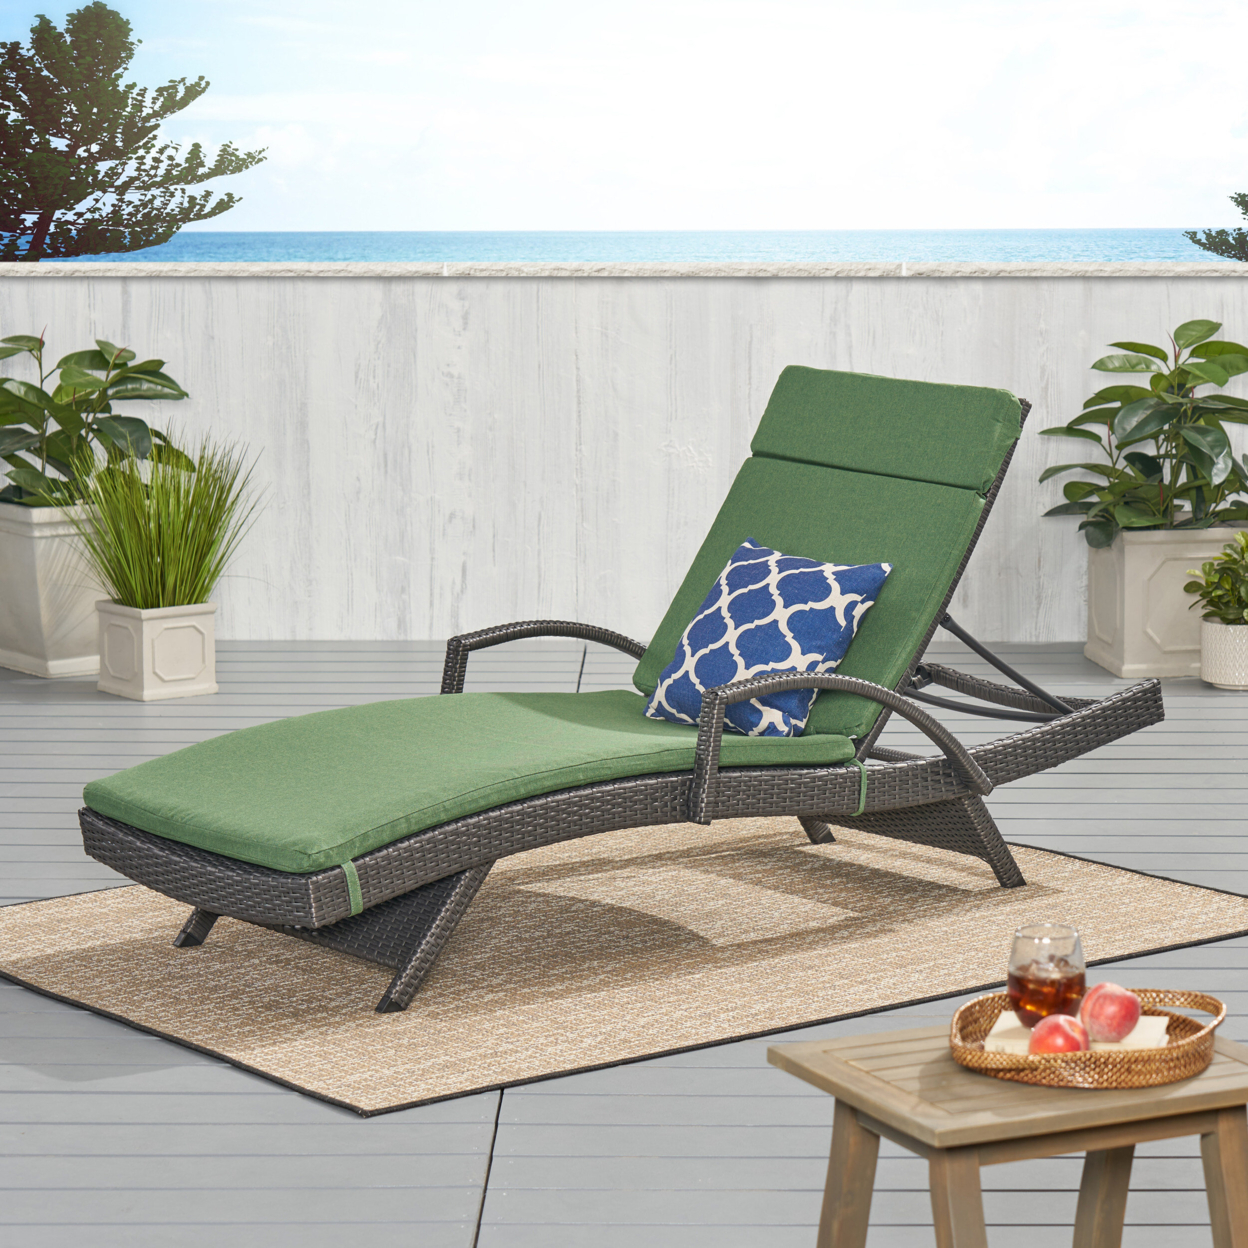 Solaris Outdoor Grey Wicker Armed Chaise Lounge With Water Resistant Cushion - Jungle Green